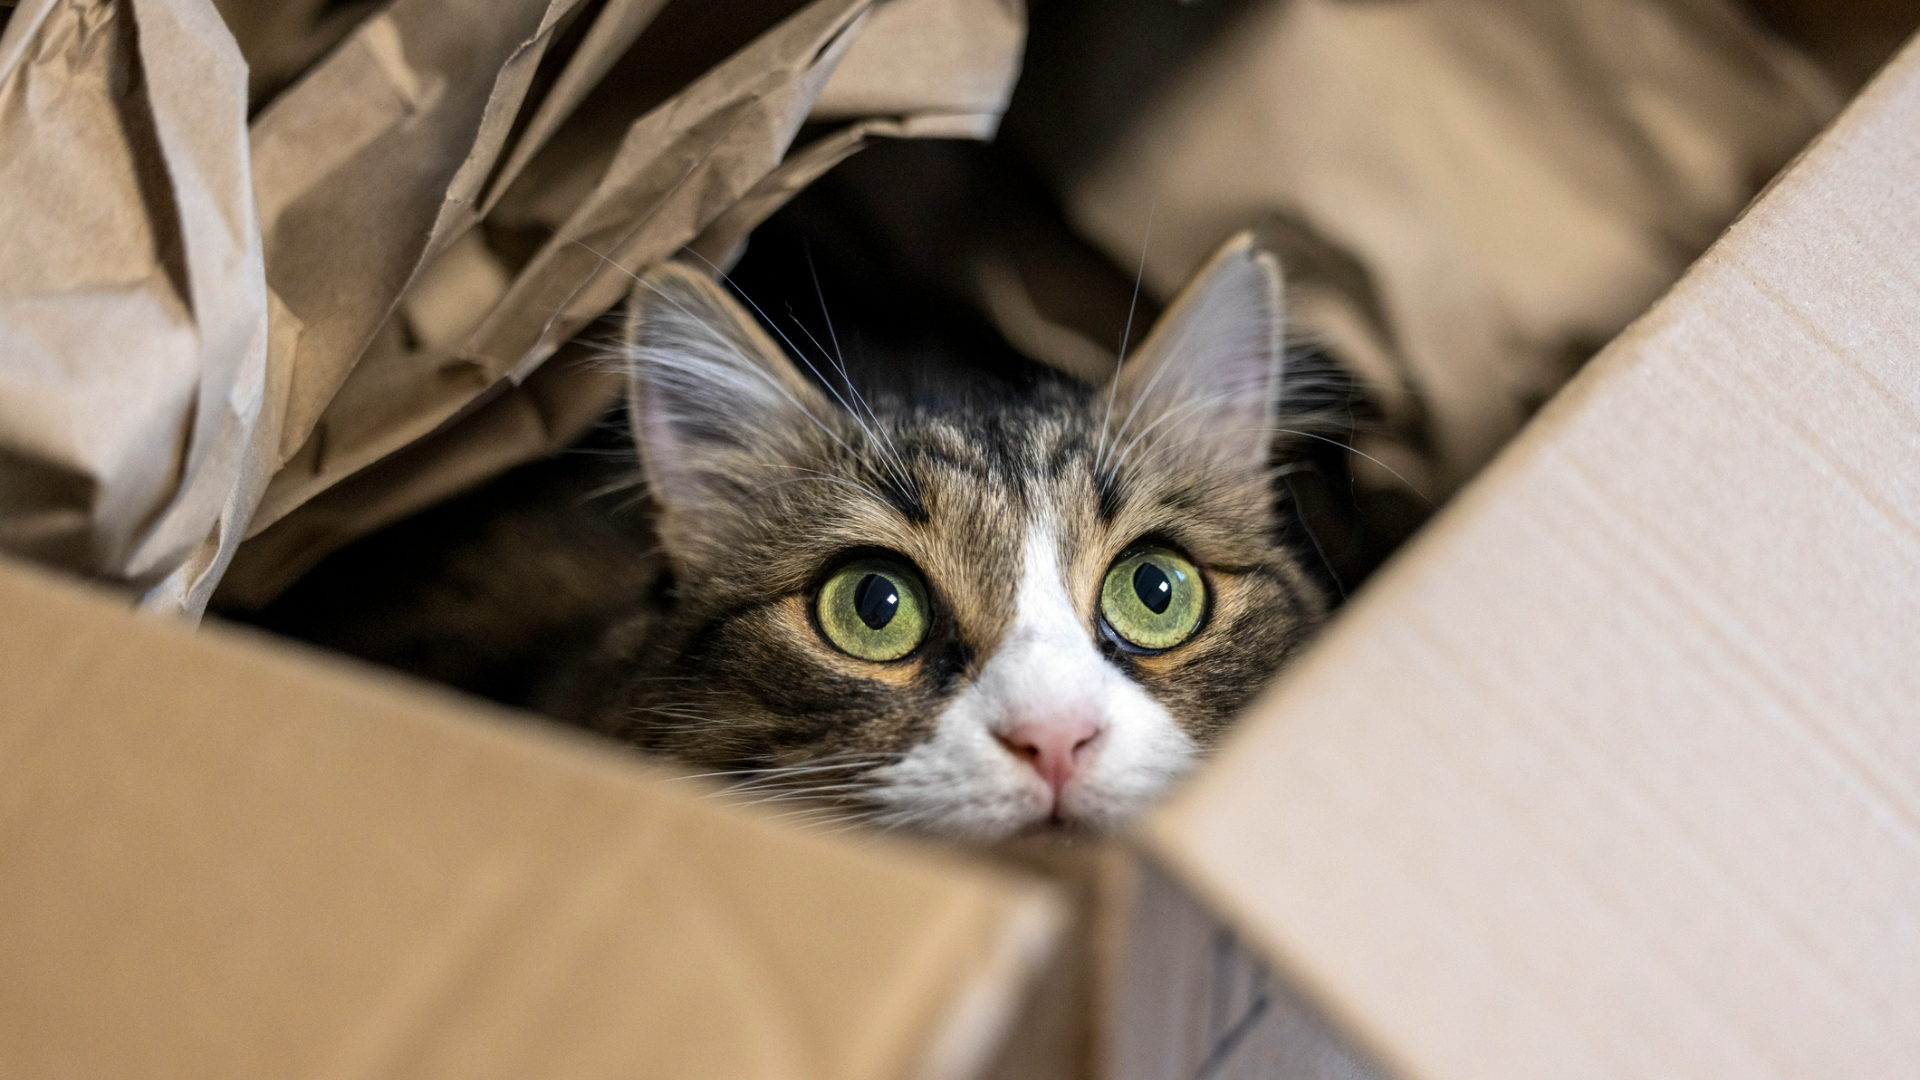 Cat in a cardboard box peering out of the top